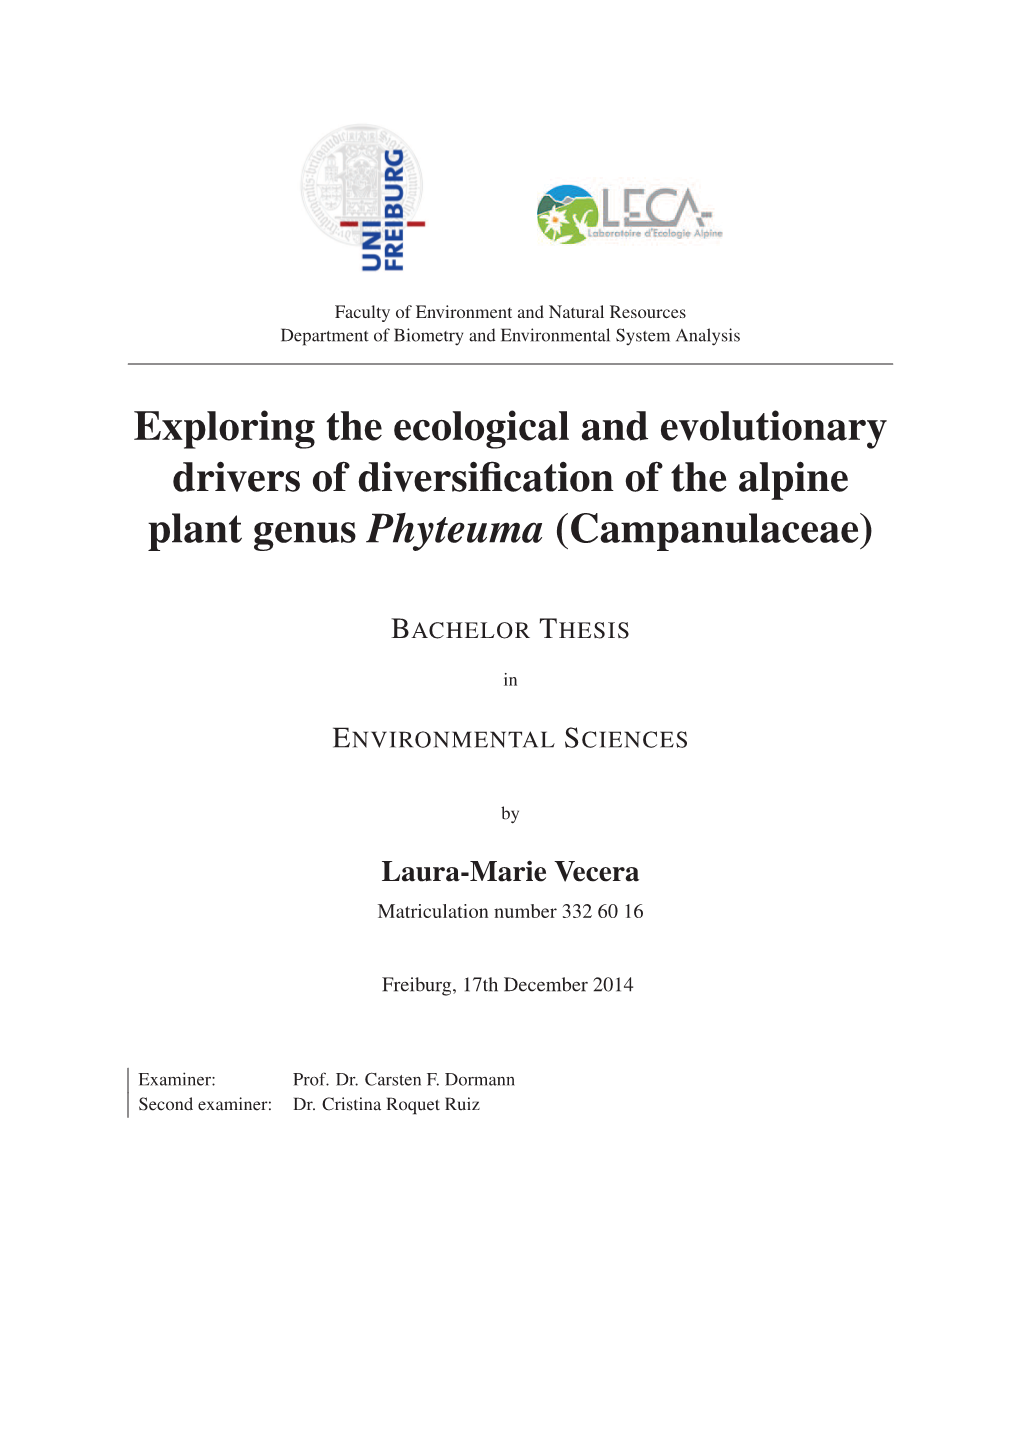 Exploring the Ecological and Evolutionary Drivers of Diversiﬁcation of the Alpine Plant Genus Phyteuma (Campanulaceae)